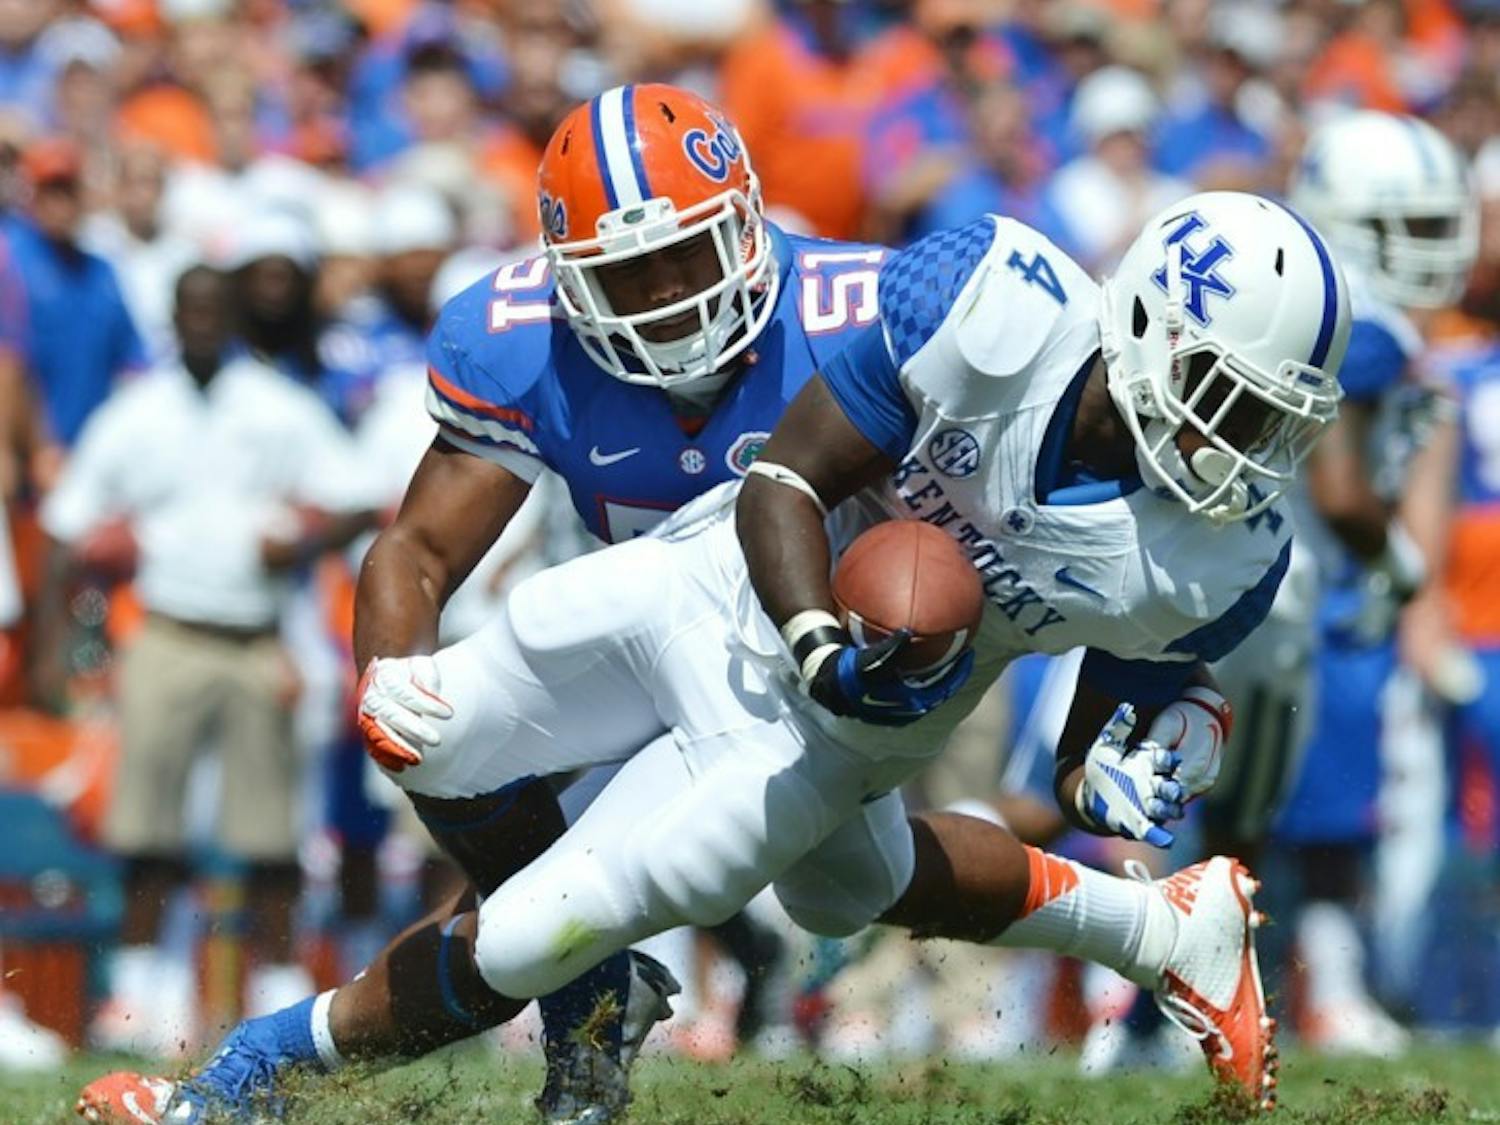 Florida linebacker Michael Taylor (51) tackles Kentucky tailback Raymond Sanders III (4) on Saturday in Ben Hill Griffin Stadium. Taylor has received more playing time since linebacker Jelani Jenkins suffered a broken thumb on Sept. 8 against the Texas A&amp;M Aggies.